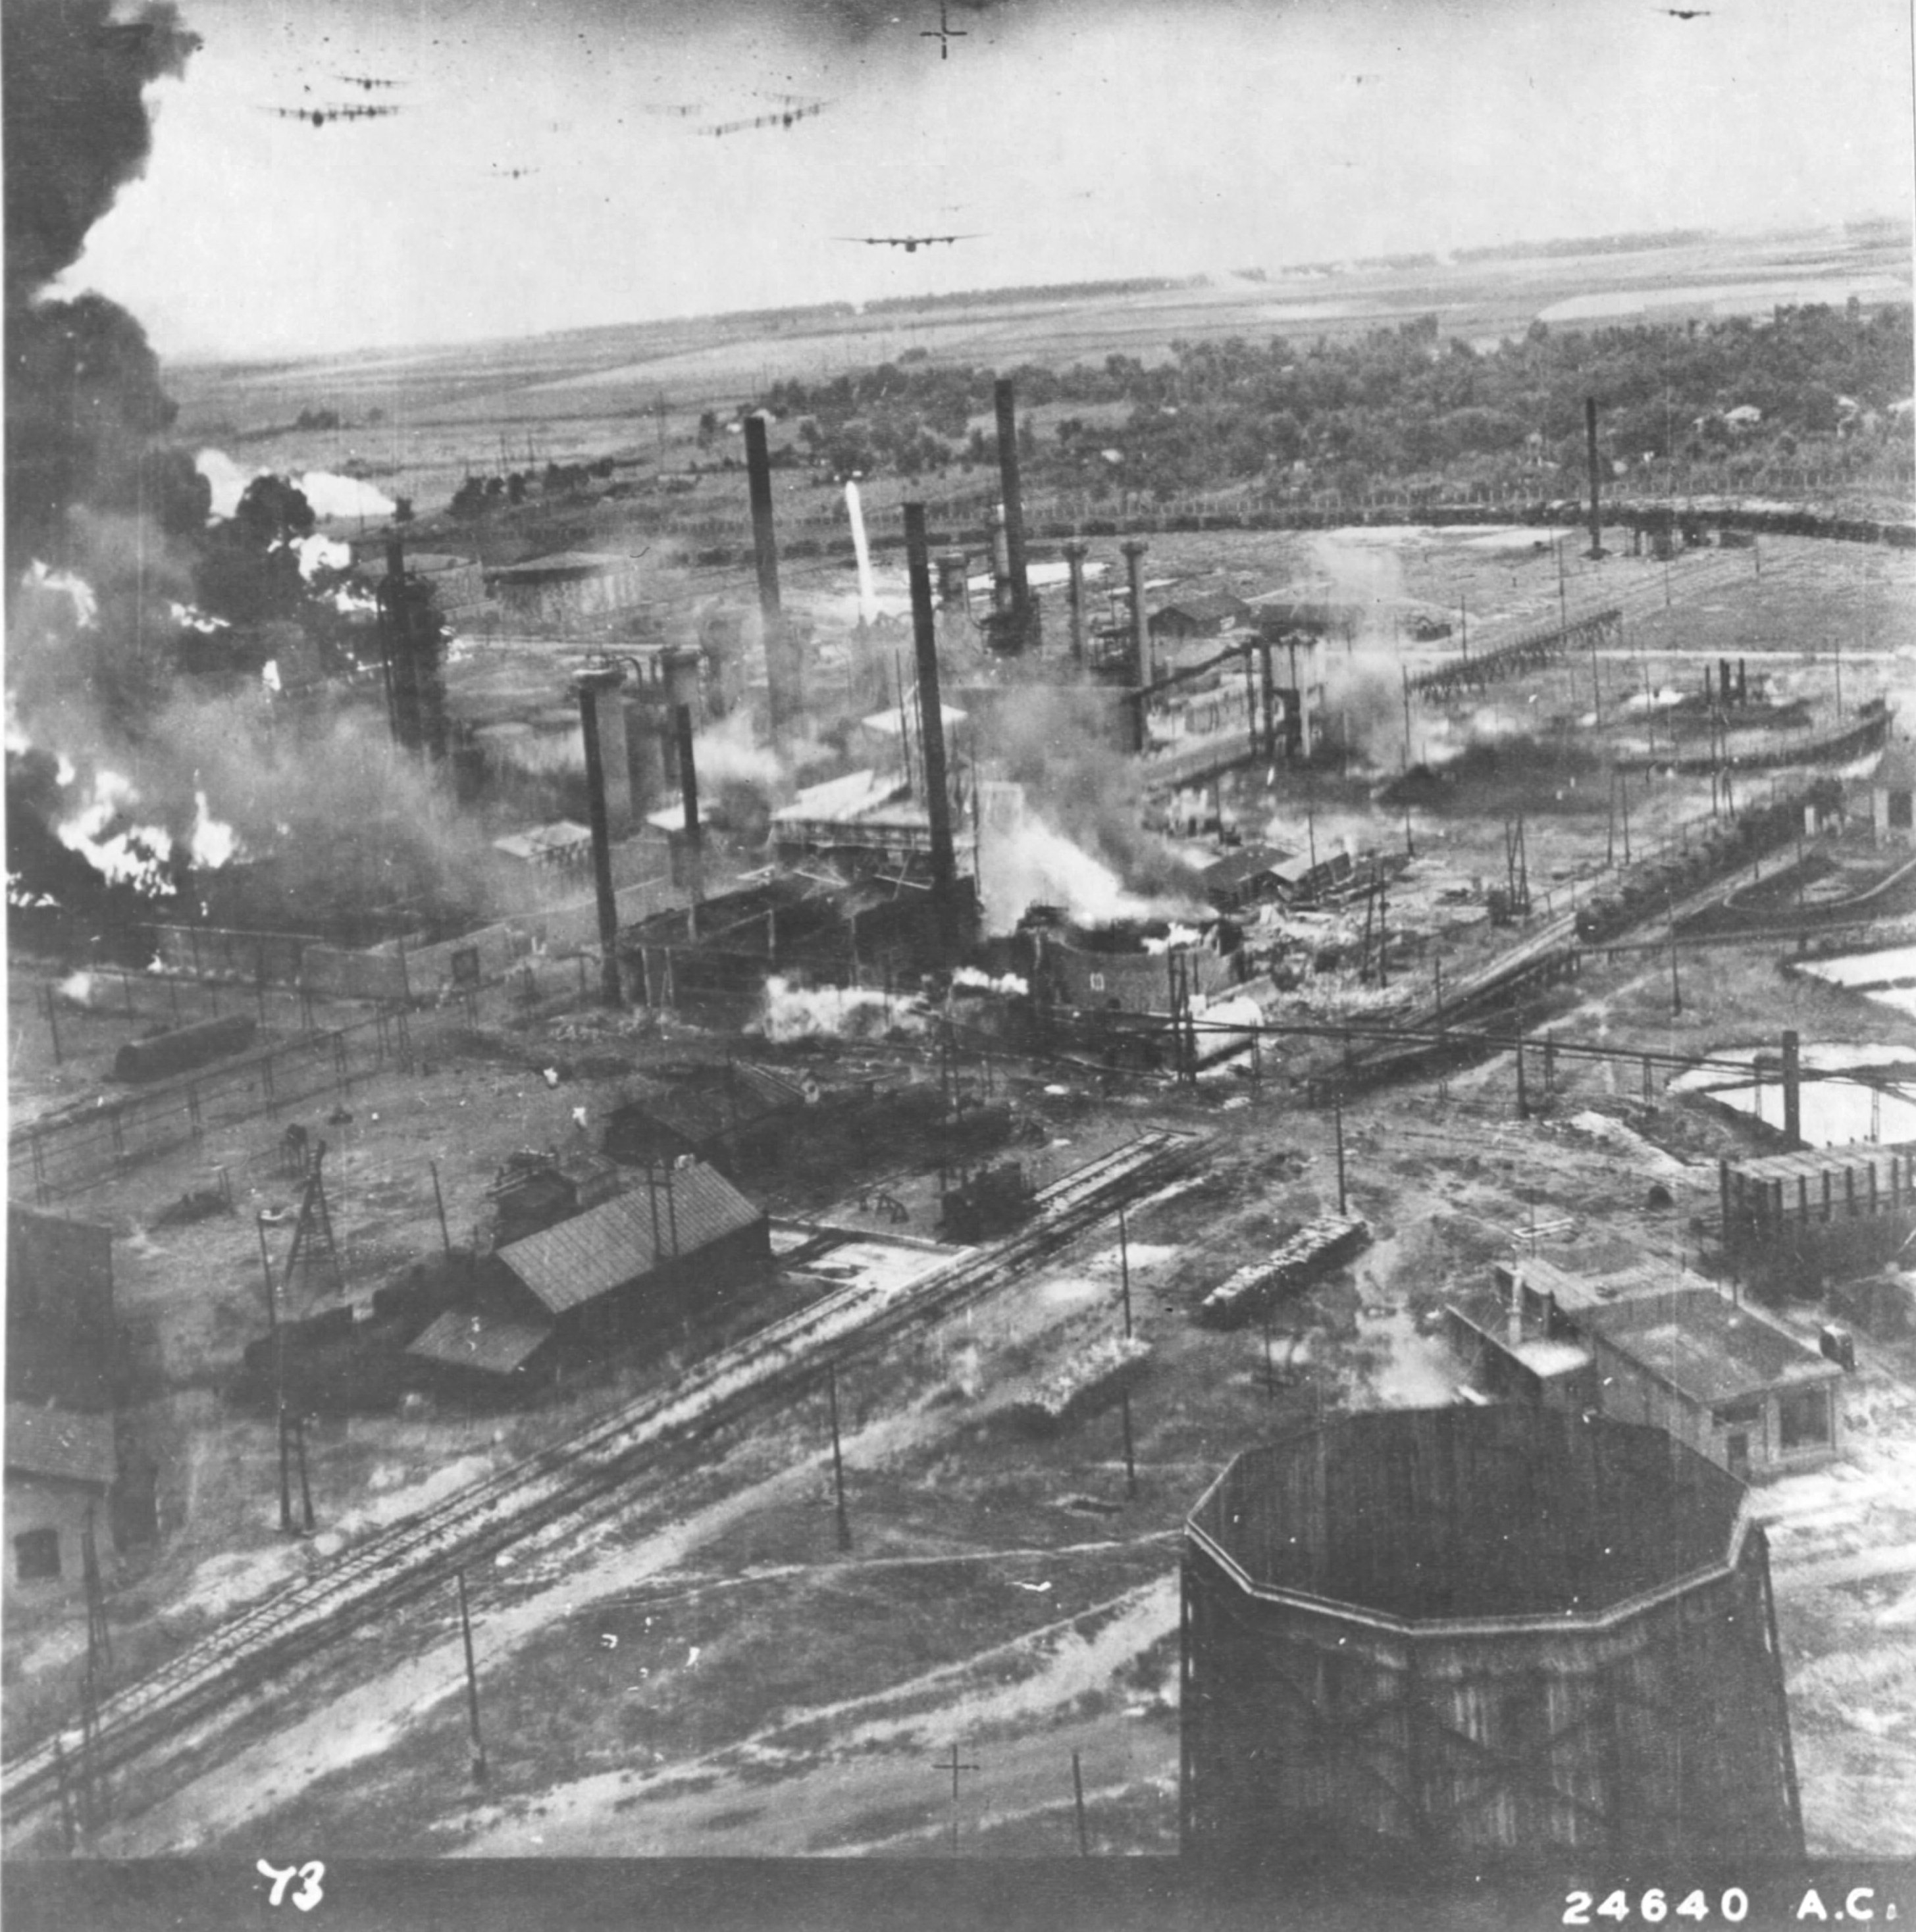 2nd wave of B-24 Liberators approach the Ploesti oil refineries, Ploesti Romania, Aug 1 1943. 14 B-24s can be seen in this image.